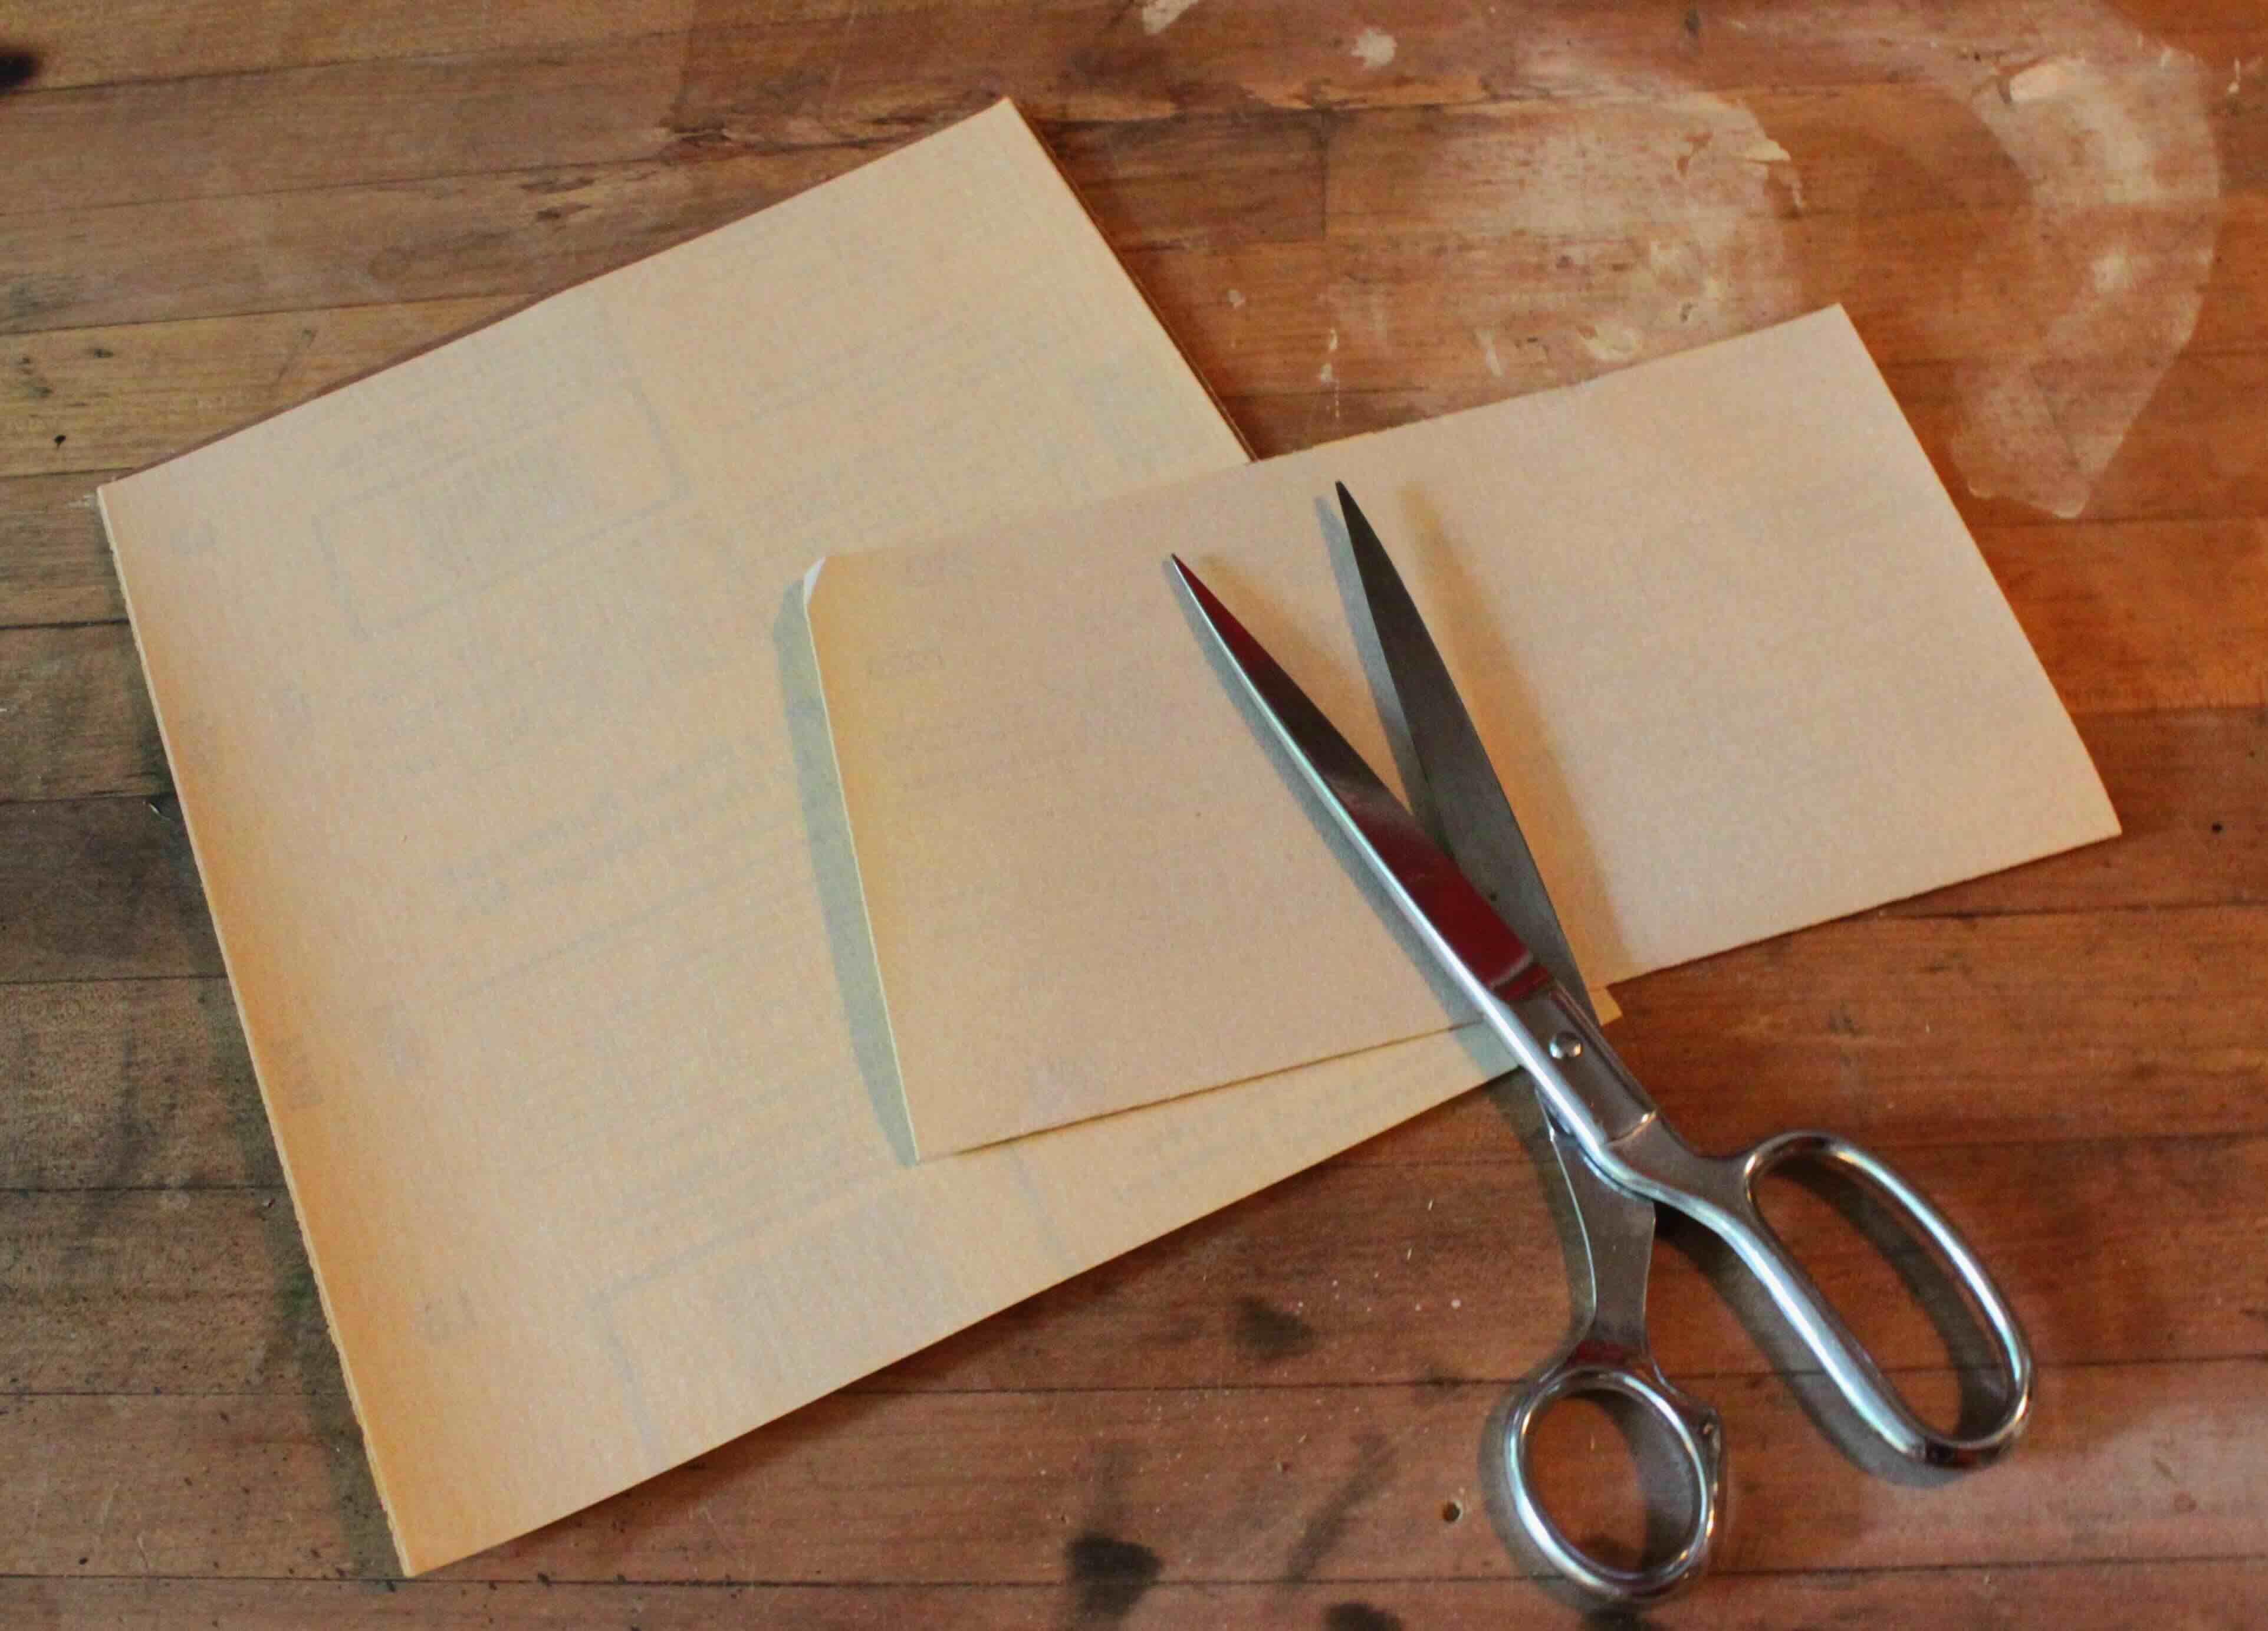 How To Sharpen Scissors With Sandpaper